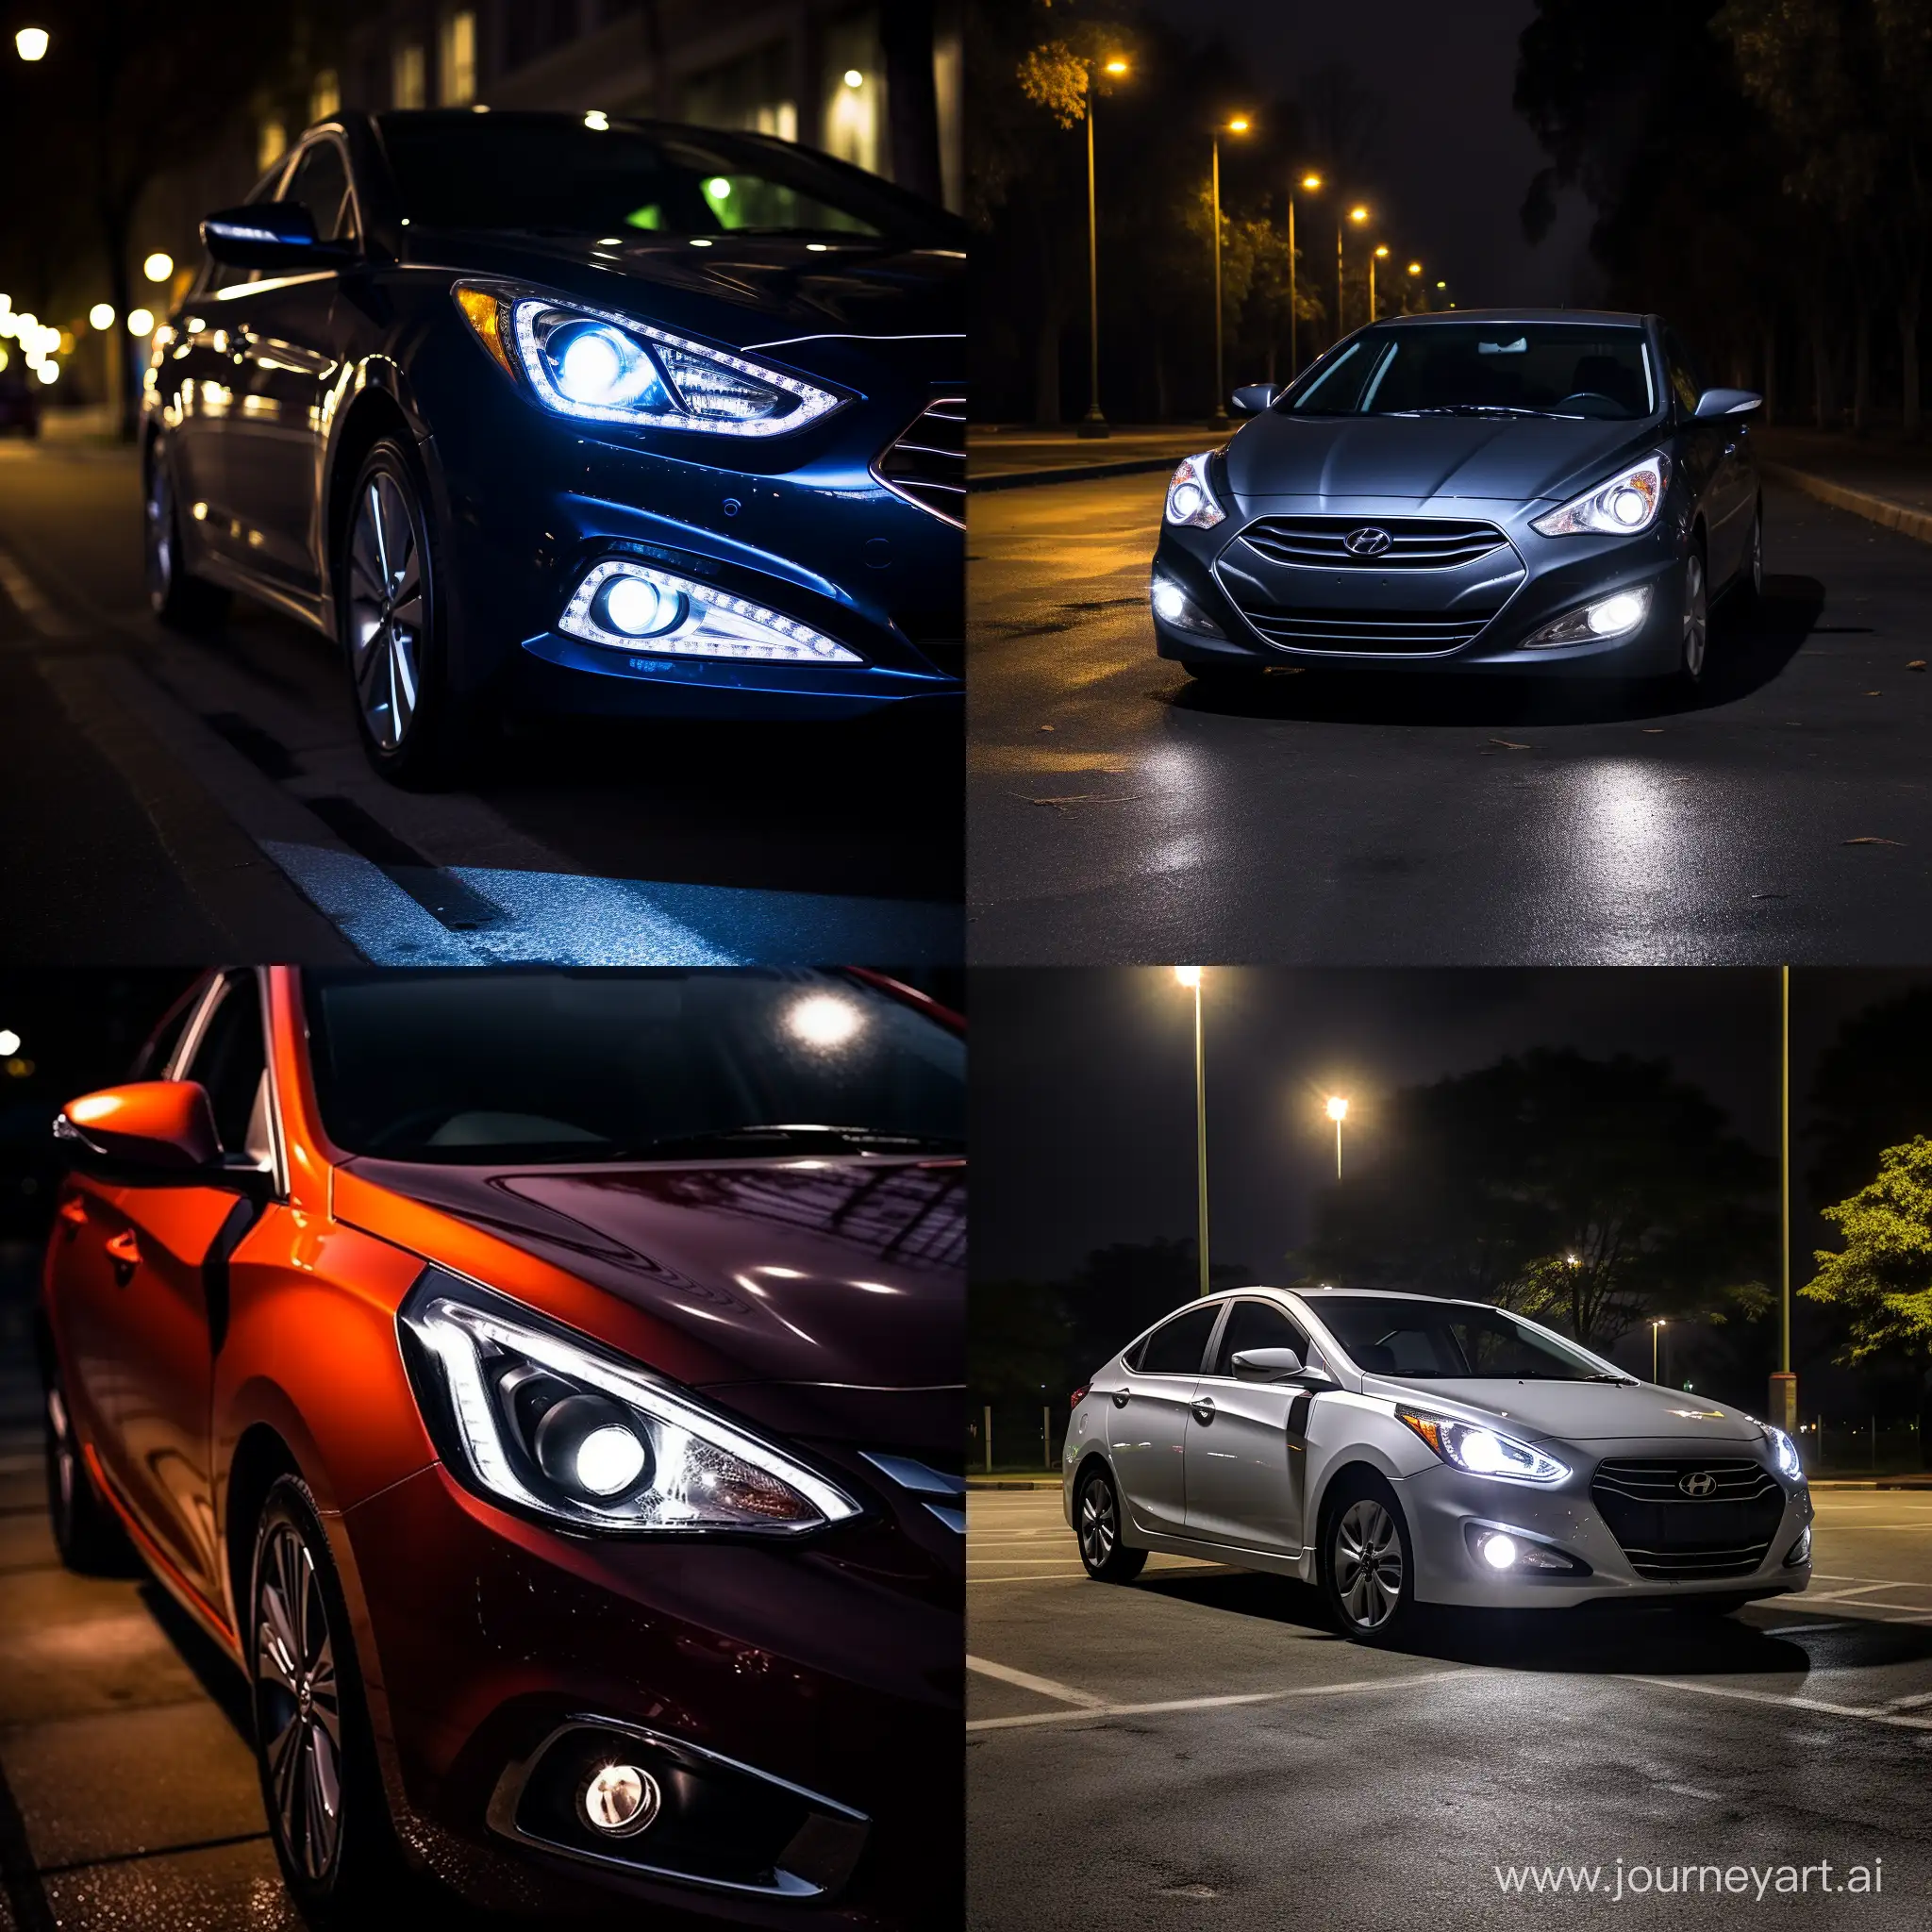 analog photo, a car Hyundai Solaris model 2012, front side, the night, right headlamp is halogen, left headlamp is  LED lamp which is brighter and clearer than right lamp.